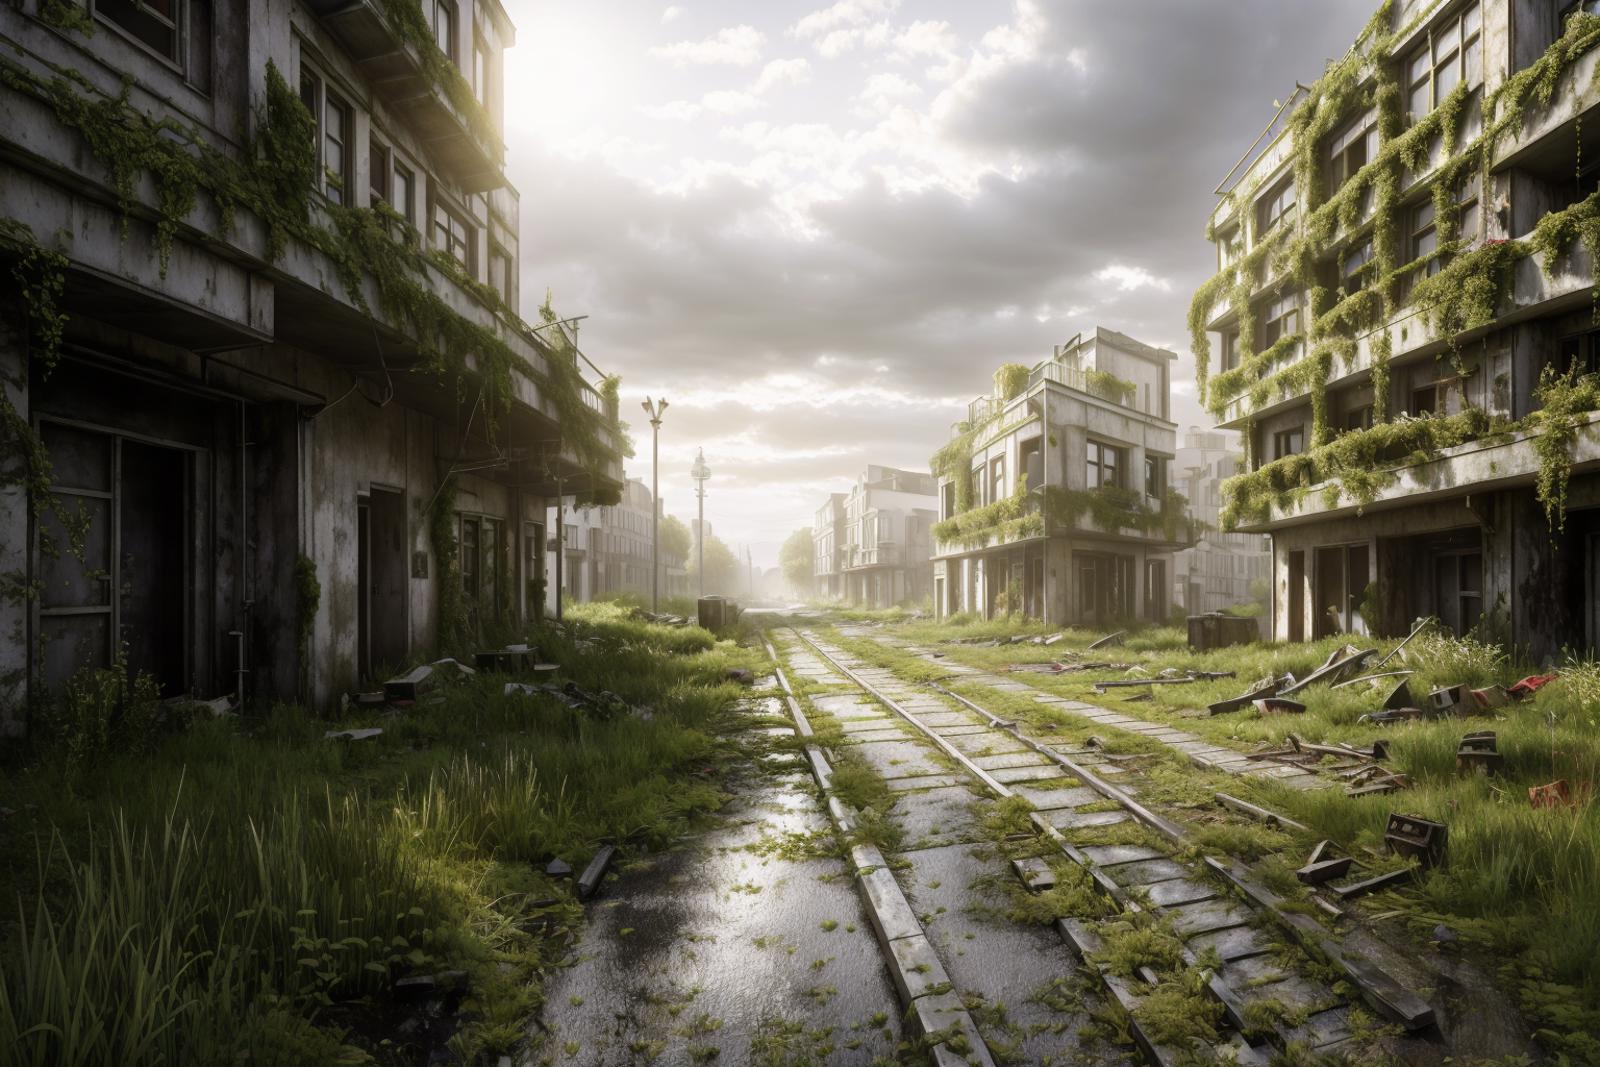 Old Time Post Apocalyptic Enviroment image by Tvirus1983